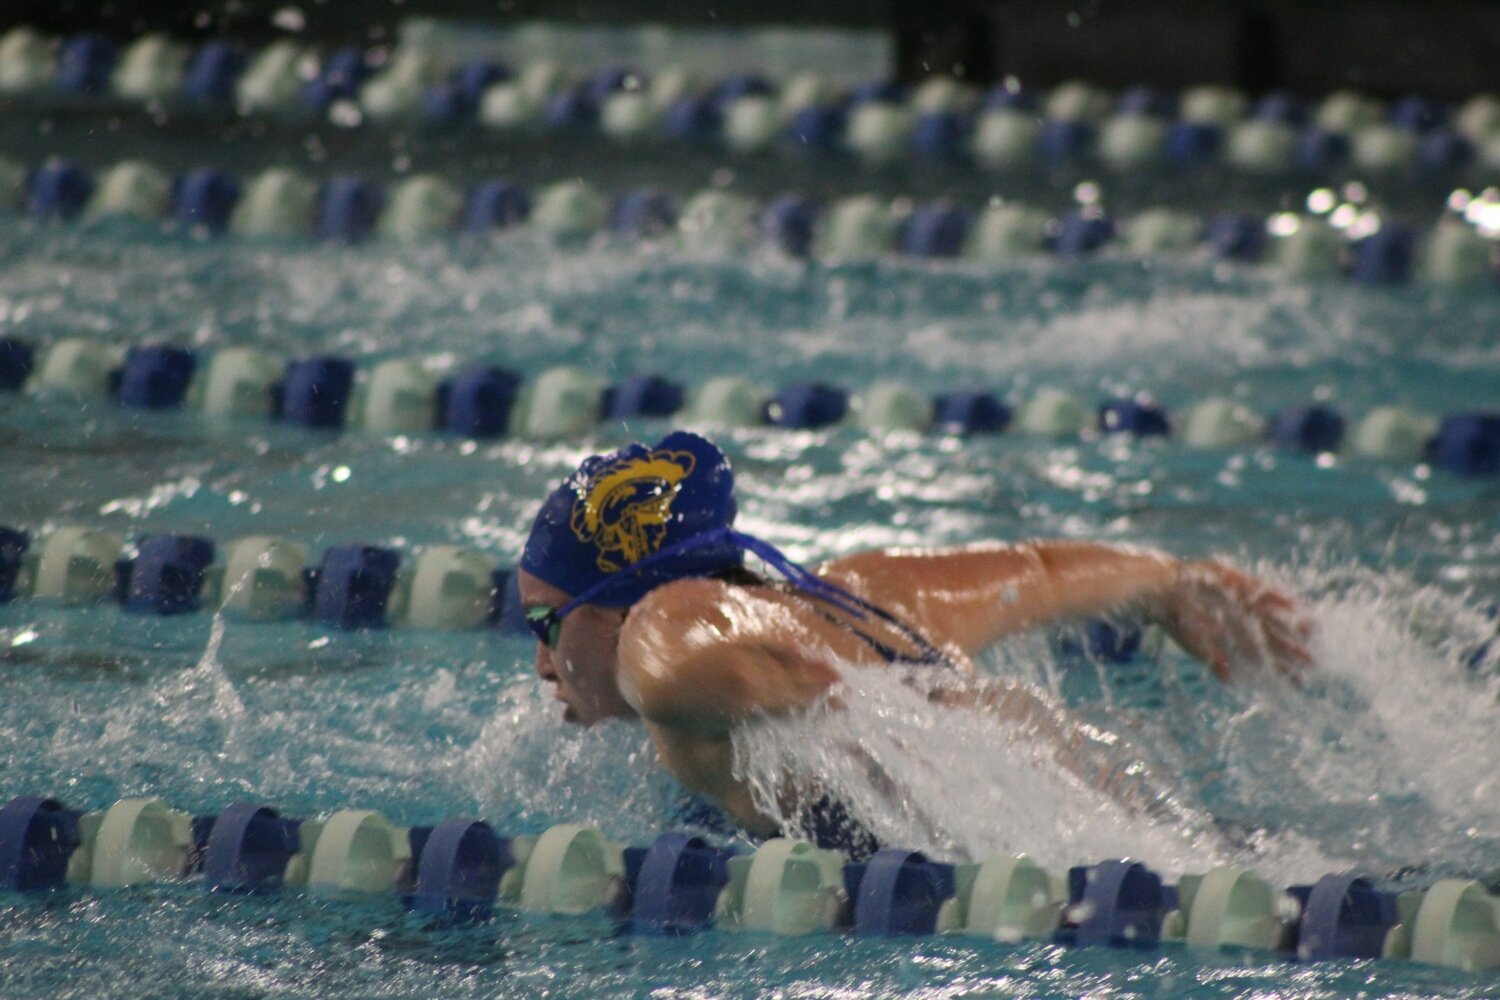 Cville's Marie Hesler will swim in three events including the 500 freestyle, 200 medley and 200 freestyle relays.